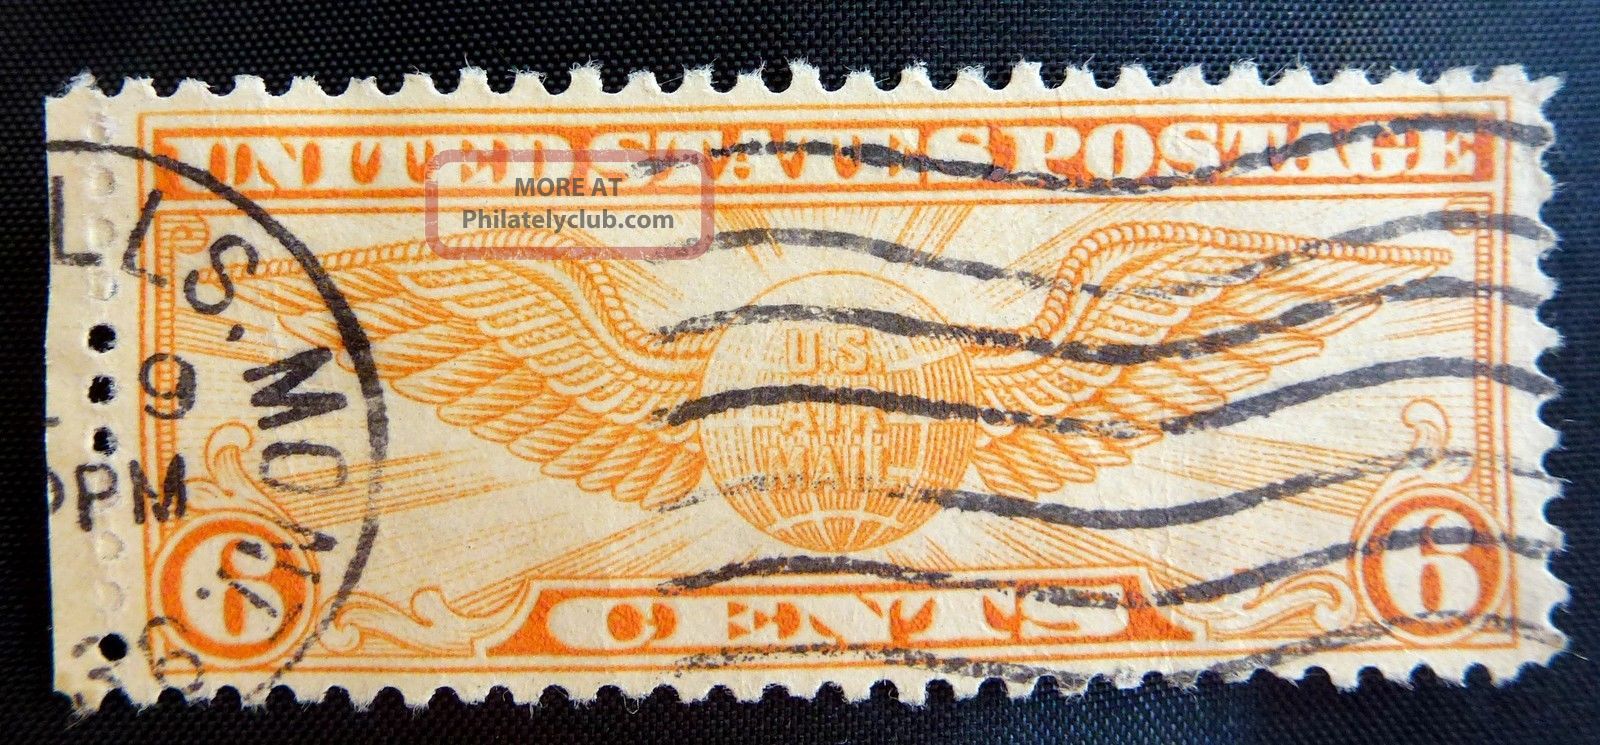 airmail 5 cent plane stamp value